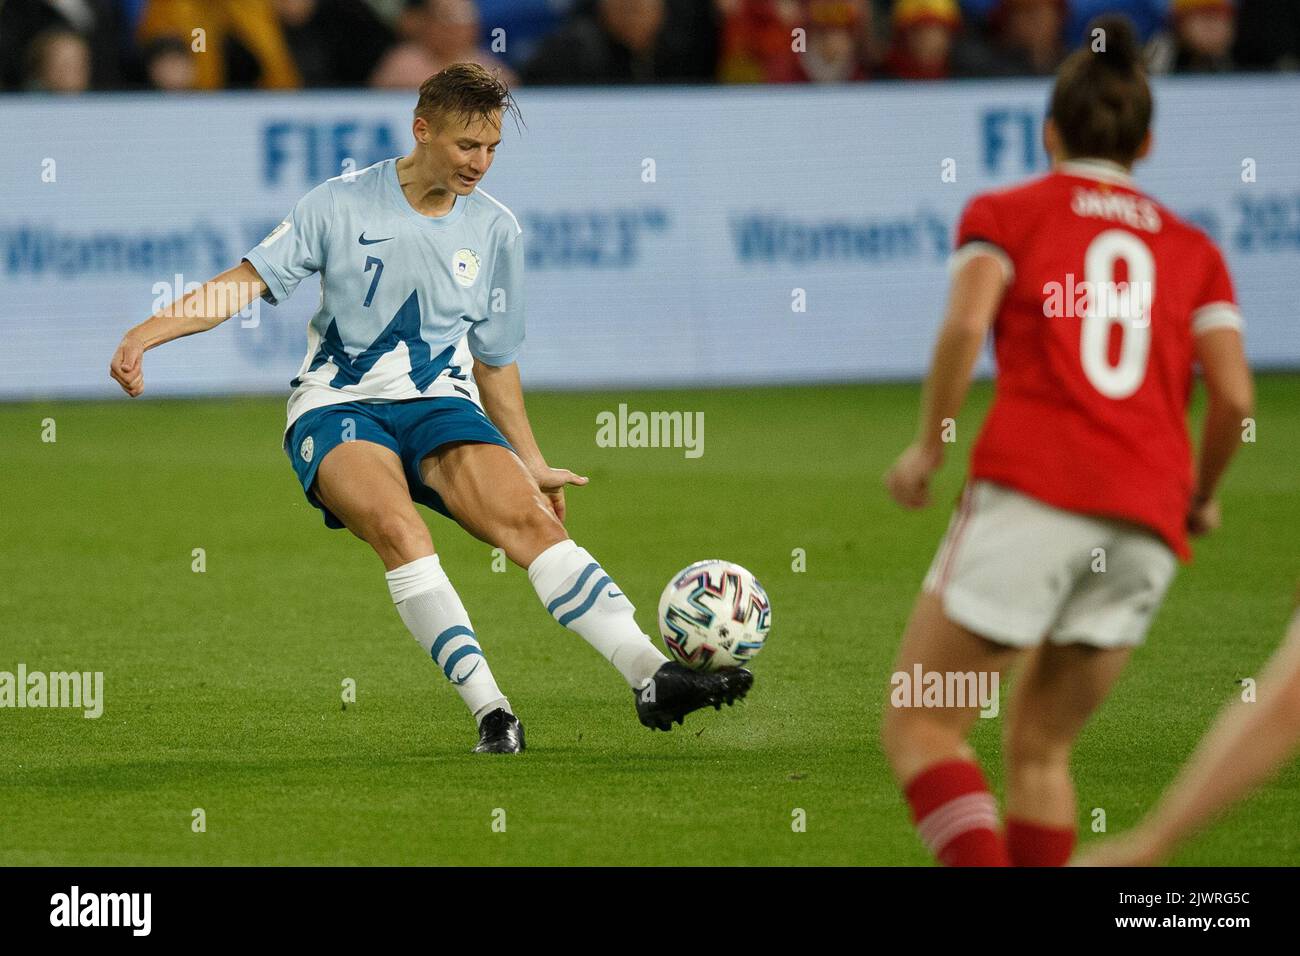 Cardiff, UK. 6th Sep, 2022. Kristina Erman of Slovenia crosses the ball during the Wales v Slovenia Women's World Cup Qualification match. Credit: Gruffydd Thomas/Alamy Live News Stock Photo